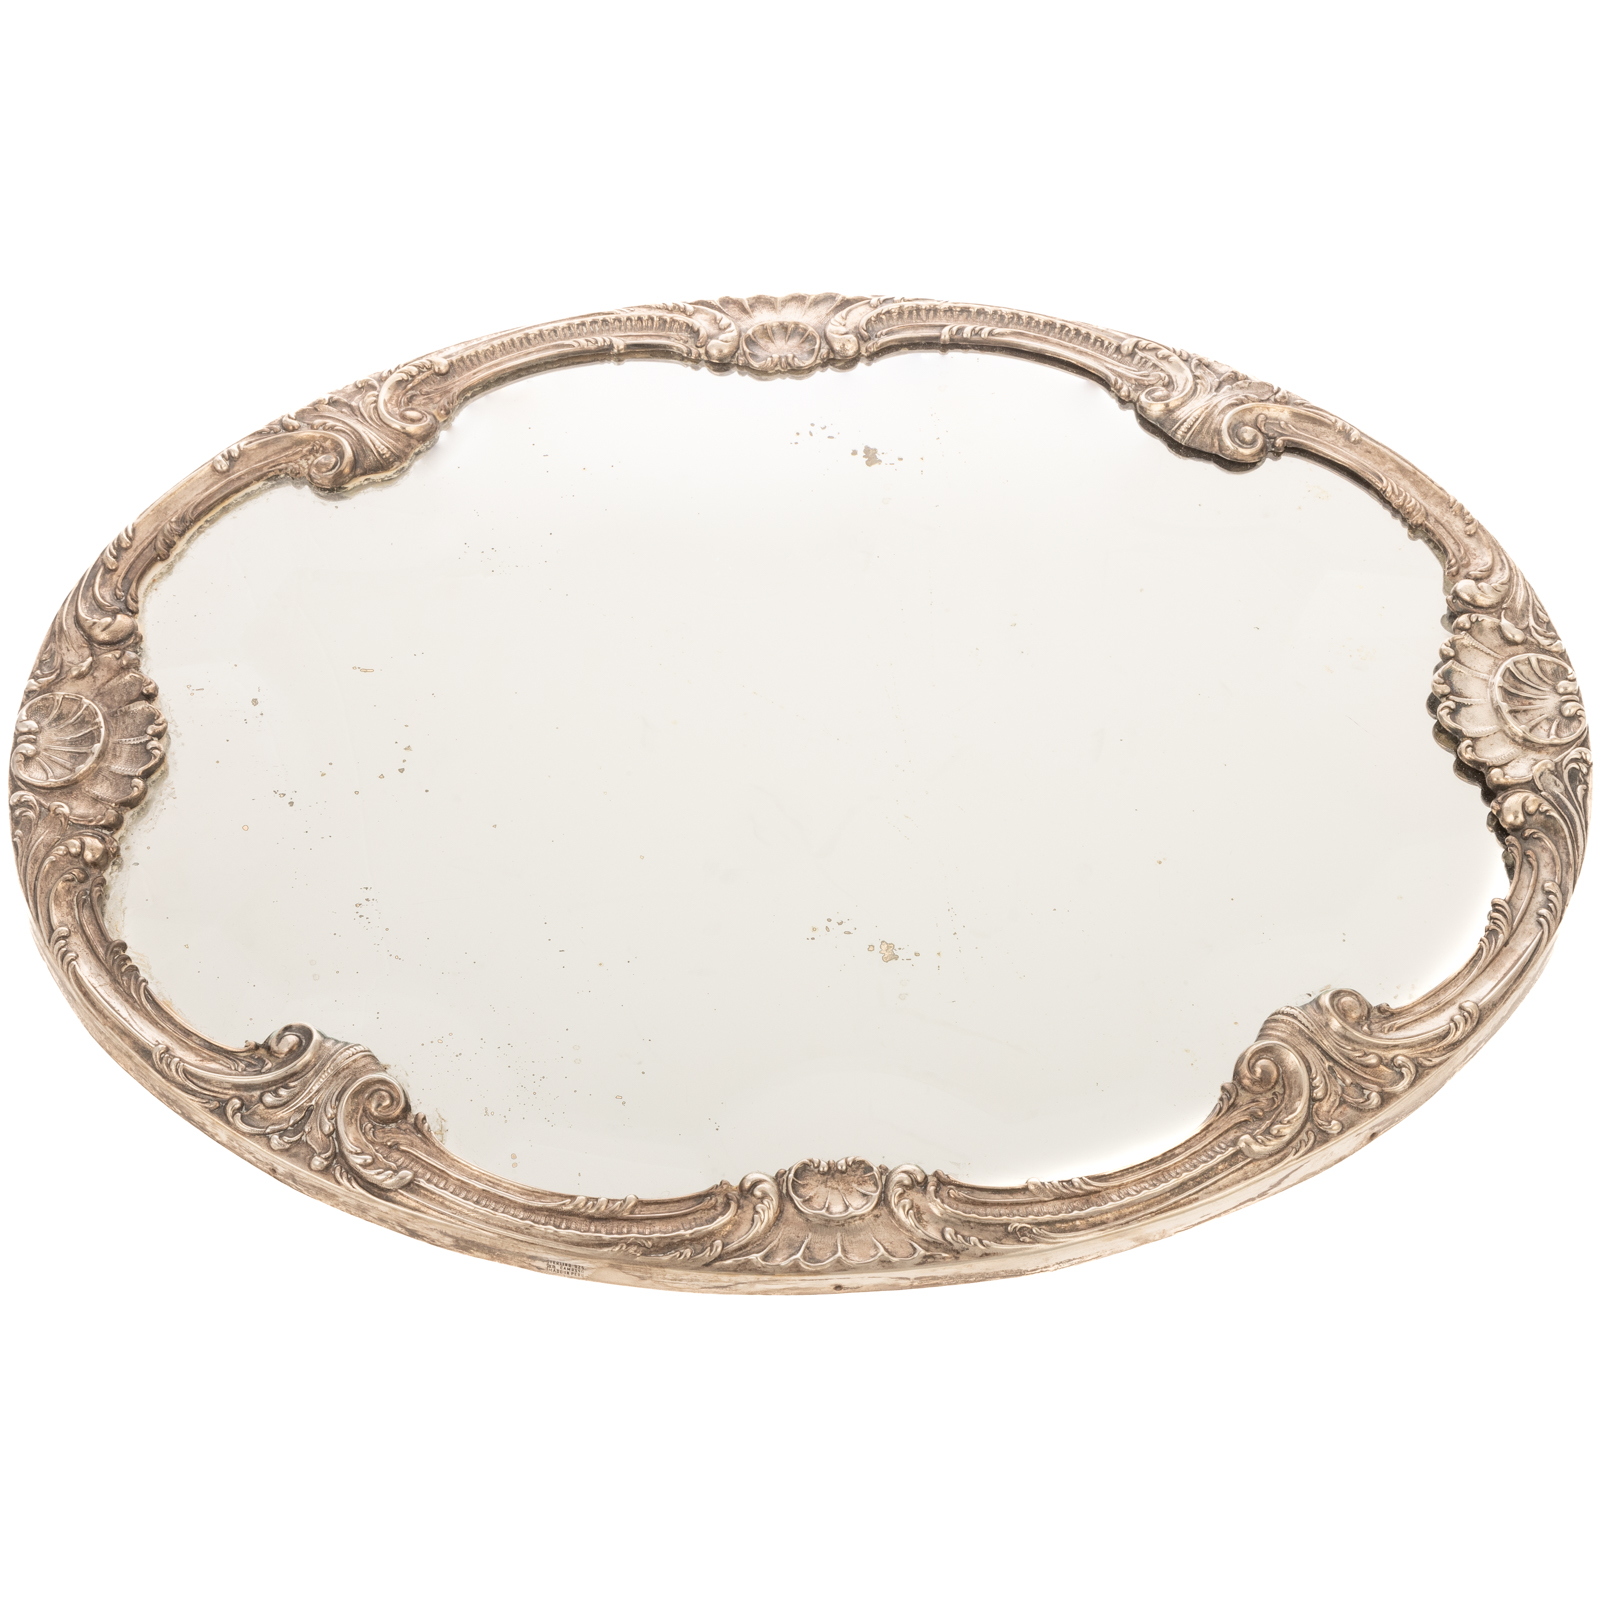 CAMUSSO STERLING MOUNTED MIRRORED 2e9ff0